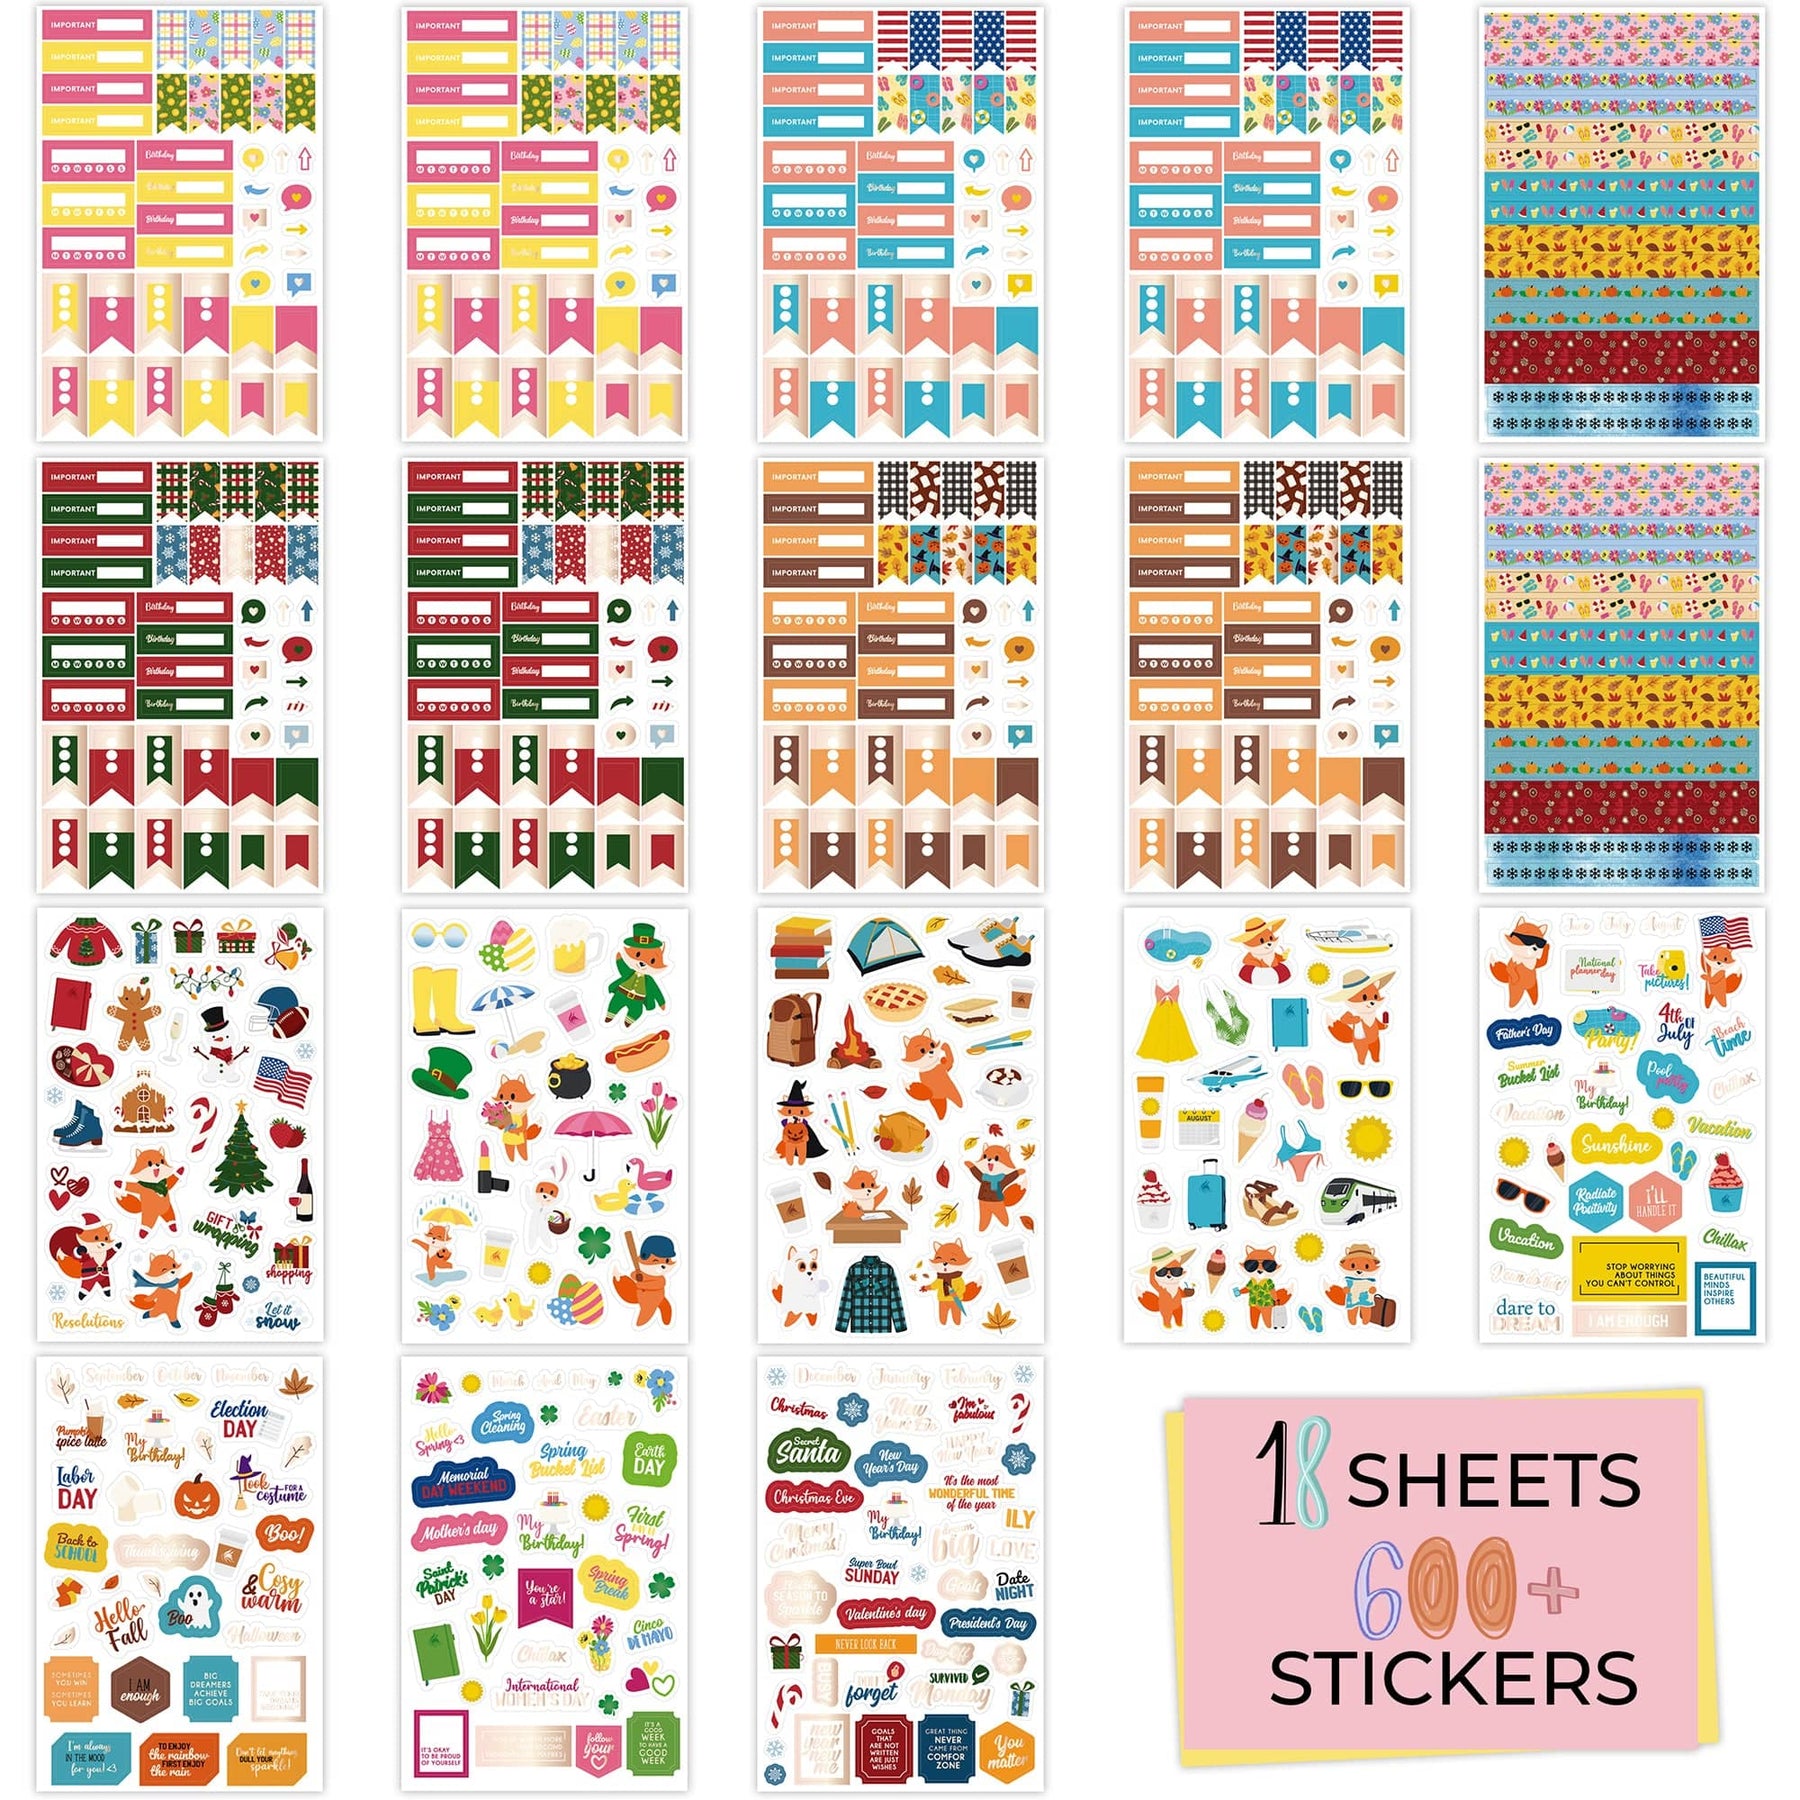 Planner Stickers - Monthly Planner Stickers and Accessories 25 Pages 1500+  Stunning Functional and Colorful Stickers,Calendar Stickers Includes